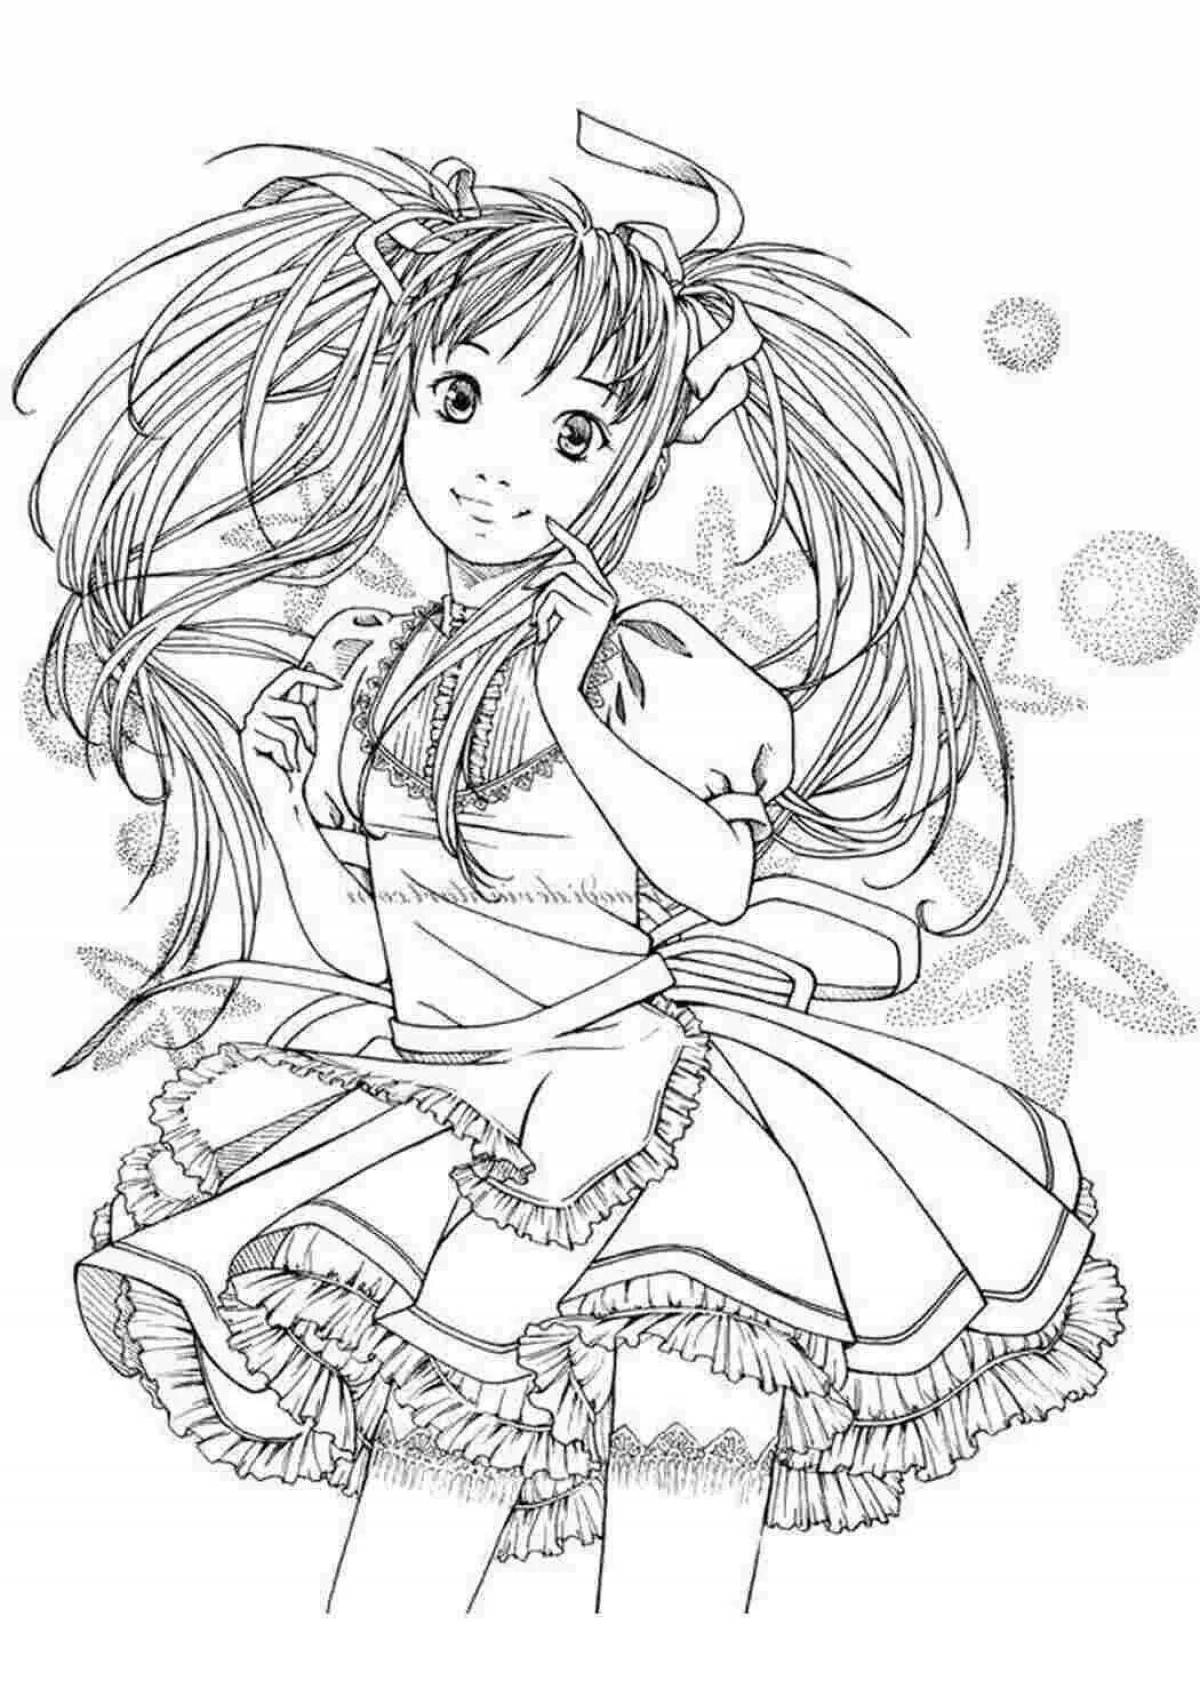 Exquisite anime coloring book for 9 years old girls